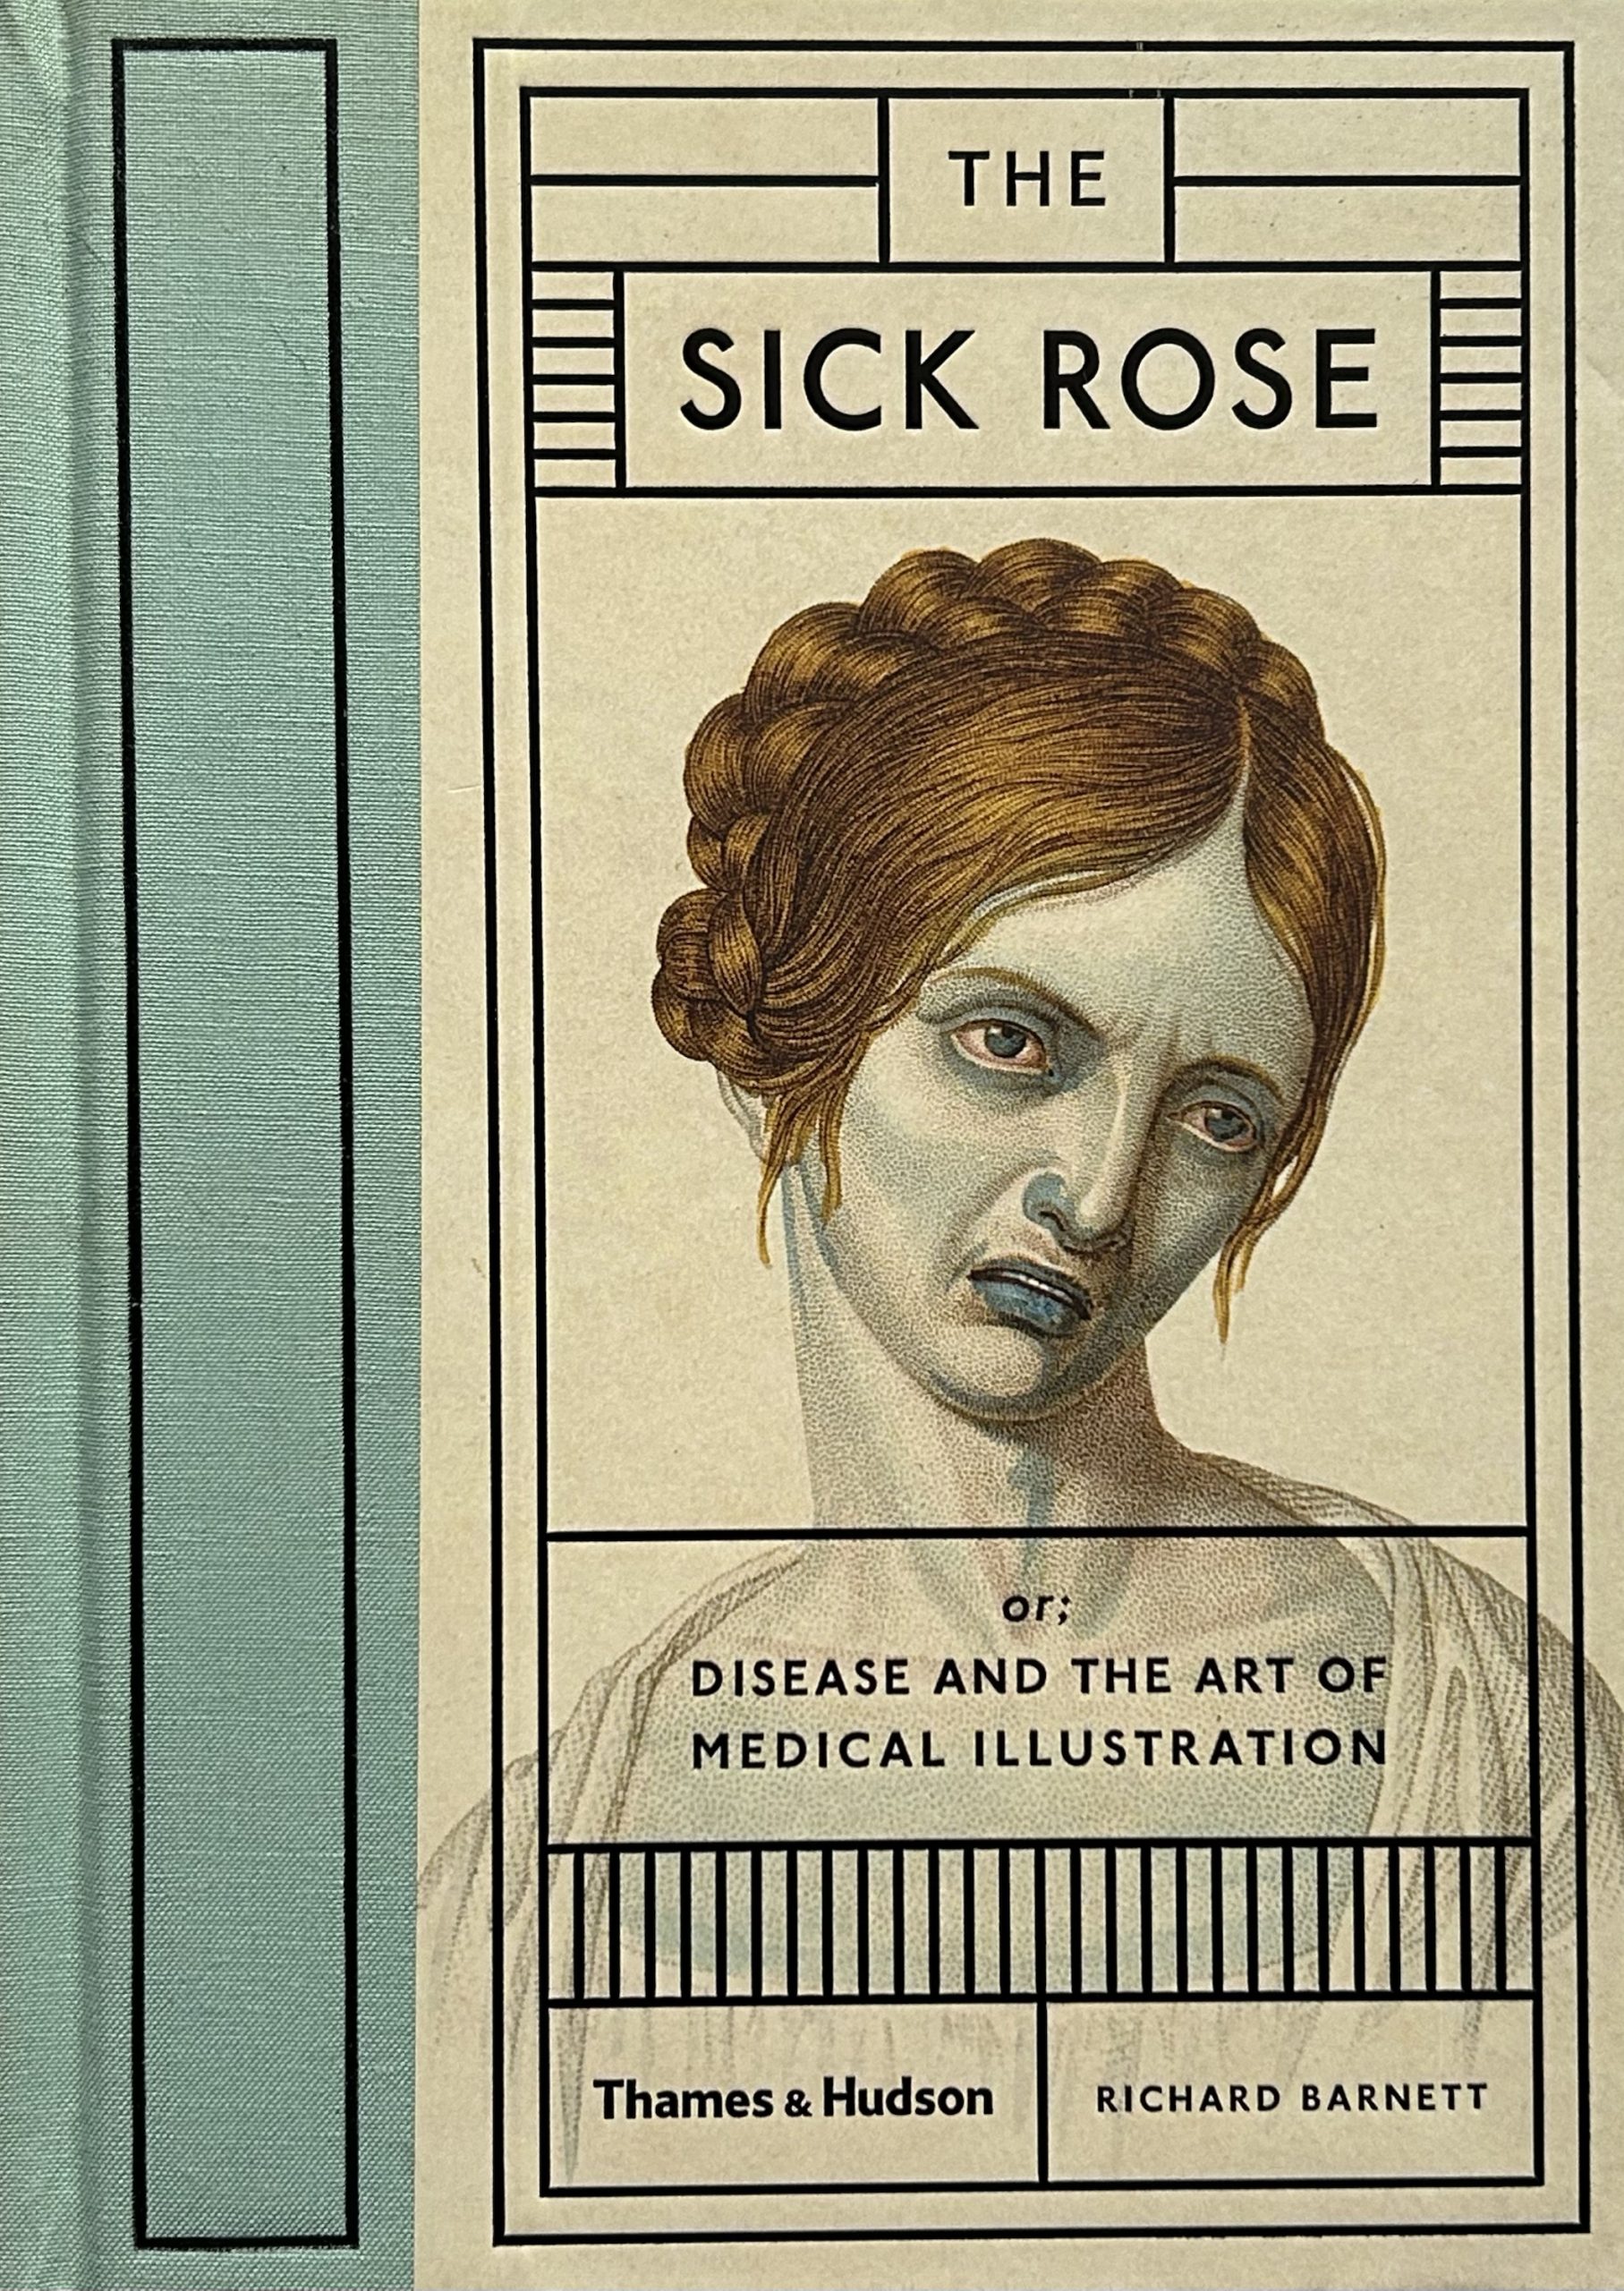 The Sick Rose: Disease and the Art of Medical Illustration by Richard Barnett